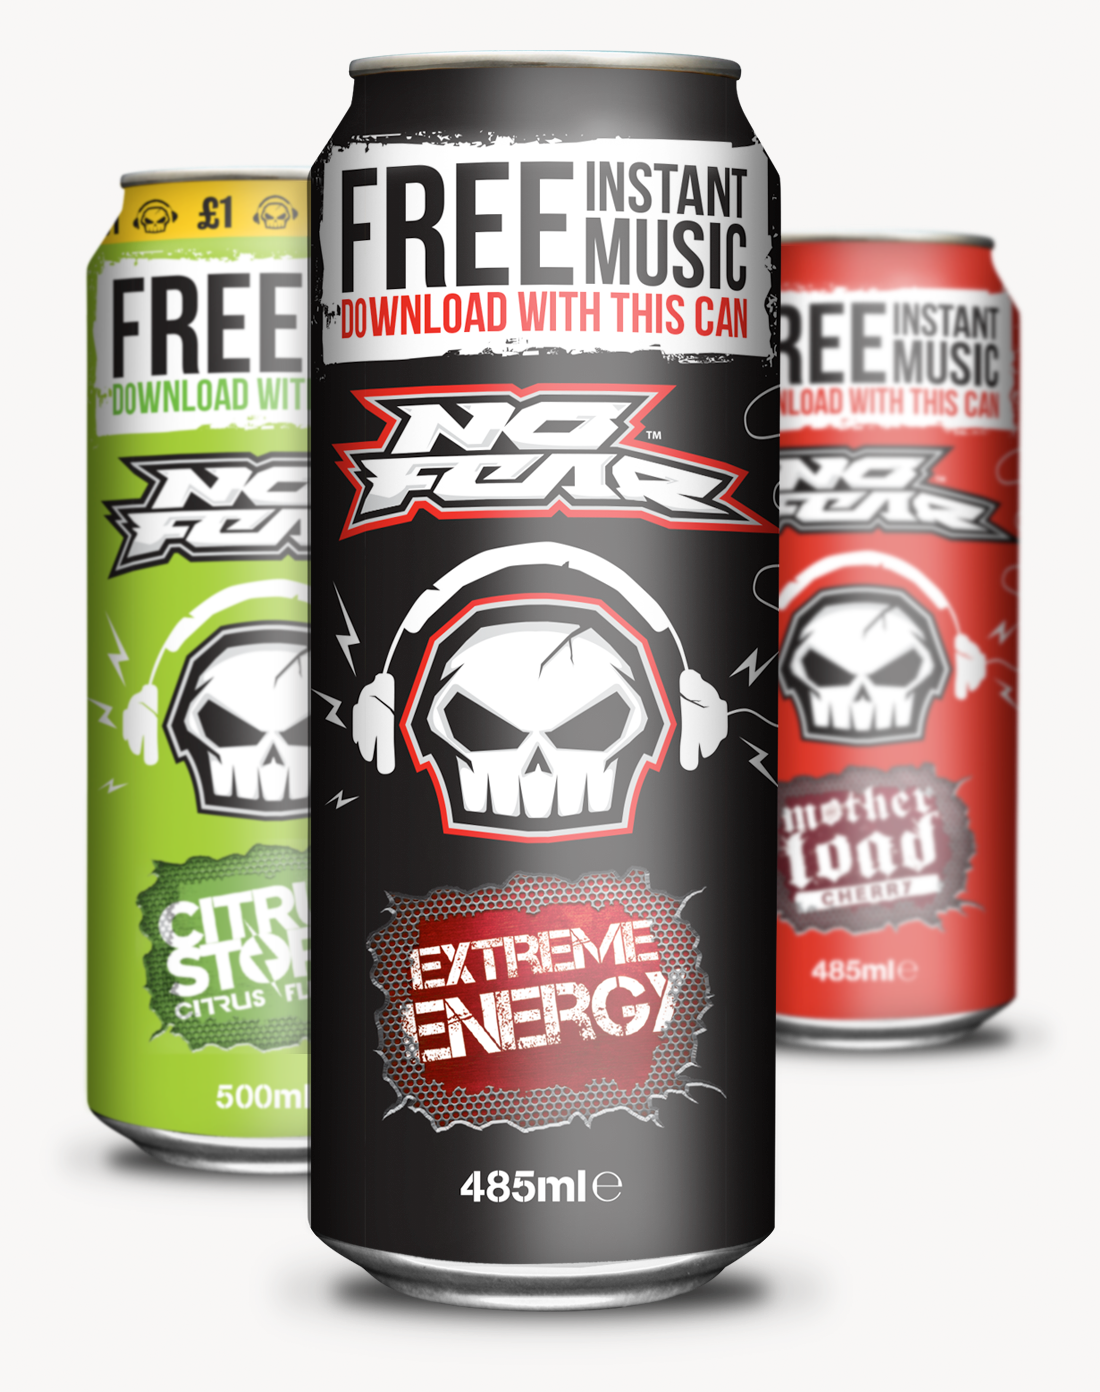 3 No Fear Extreme energy Music Promo cans